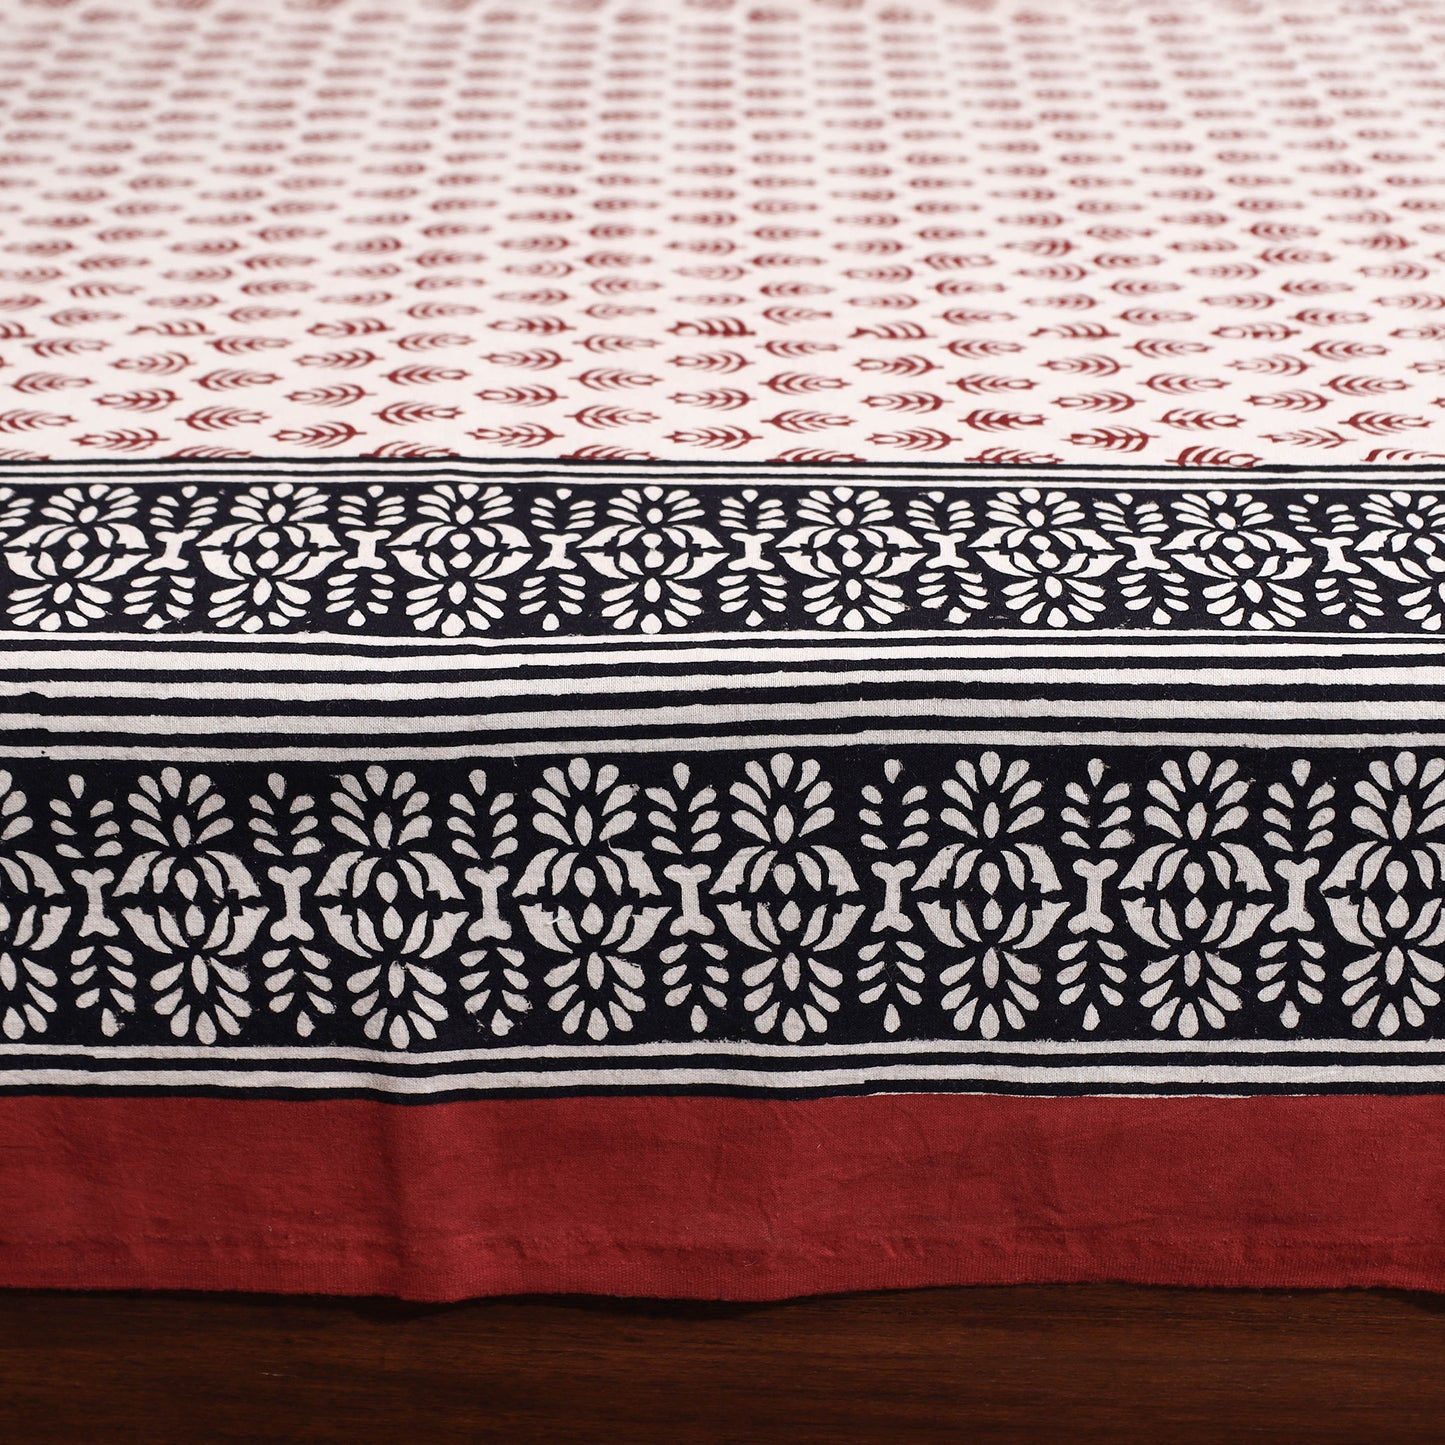 Red - Bagru Hand Block Printed Cotton Single Bed Cover (90 x 60 in)